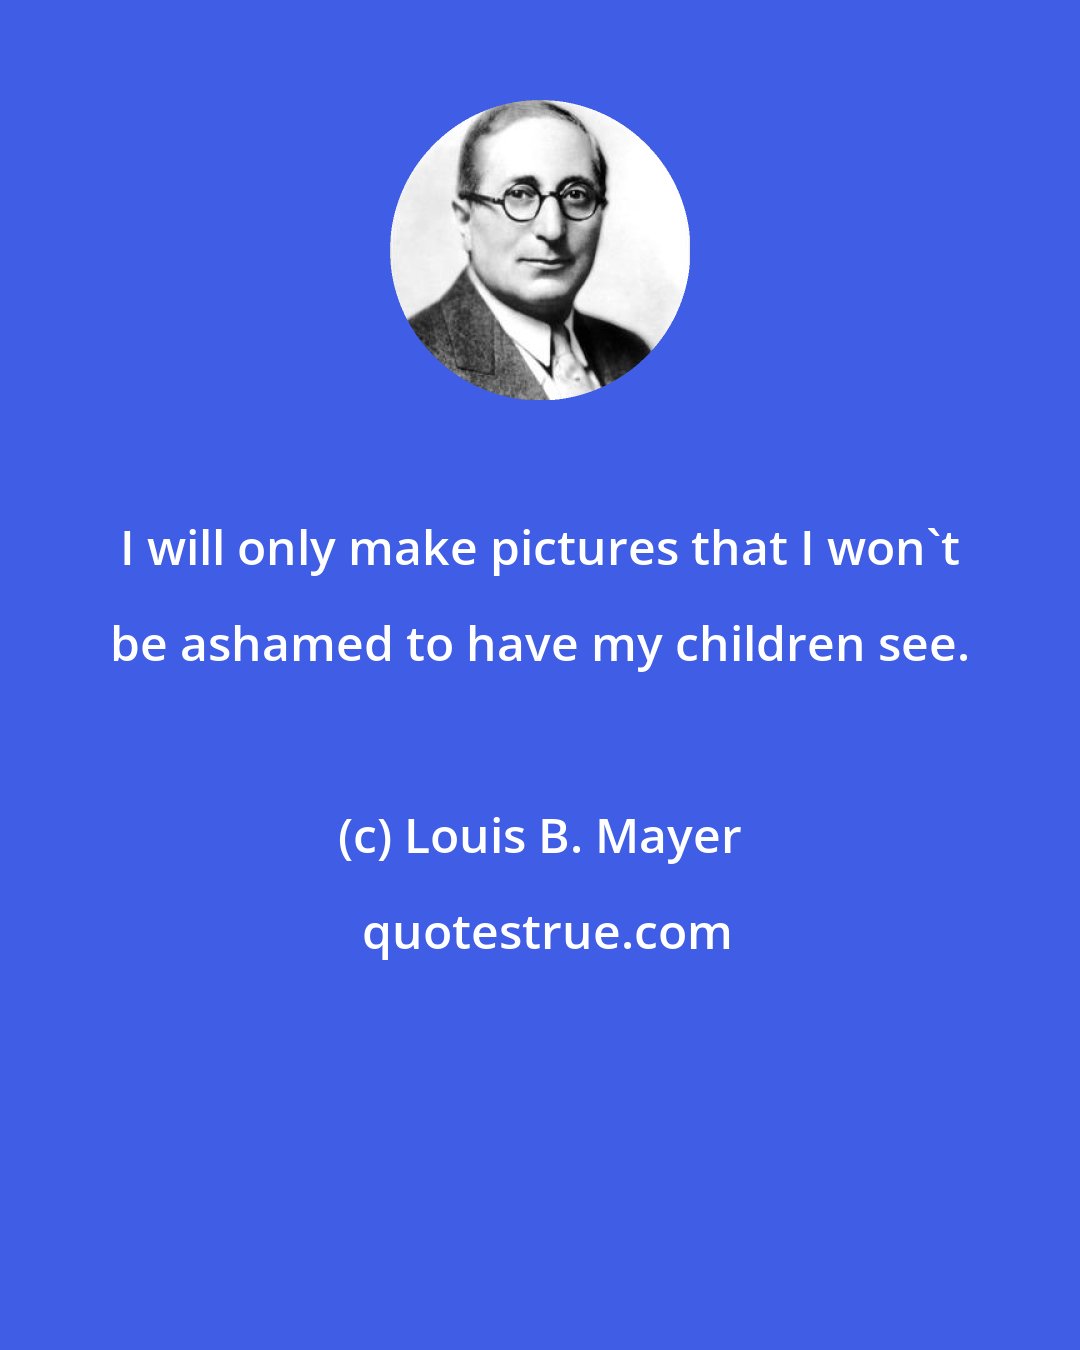 Louis B. Mayer: I will only make pictures that I won't be ashamed to have my children see.